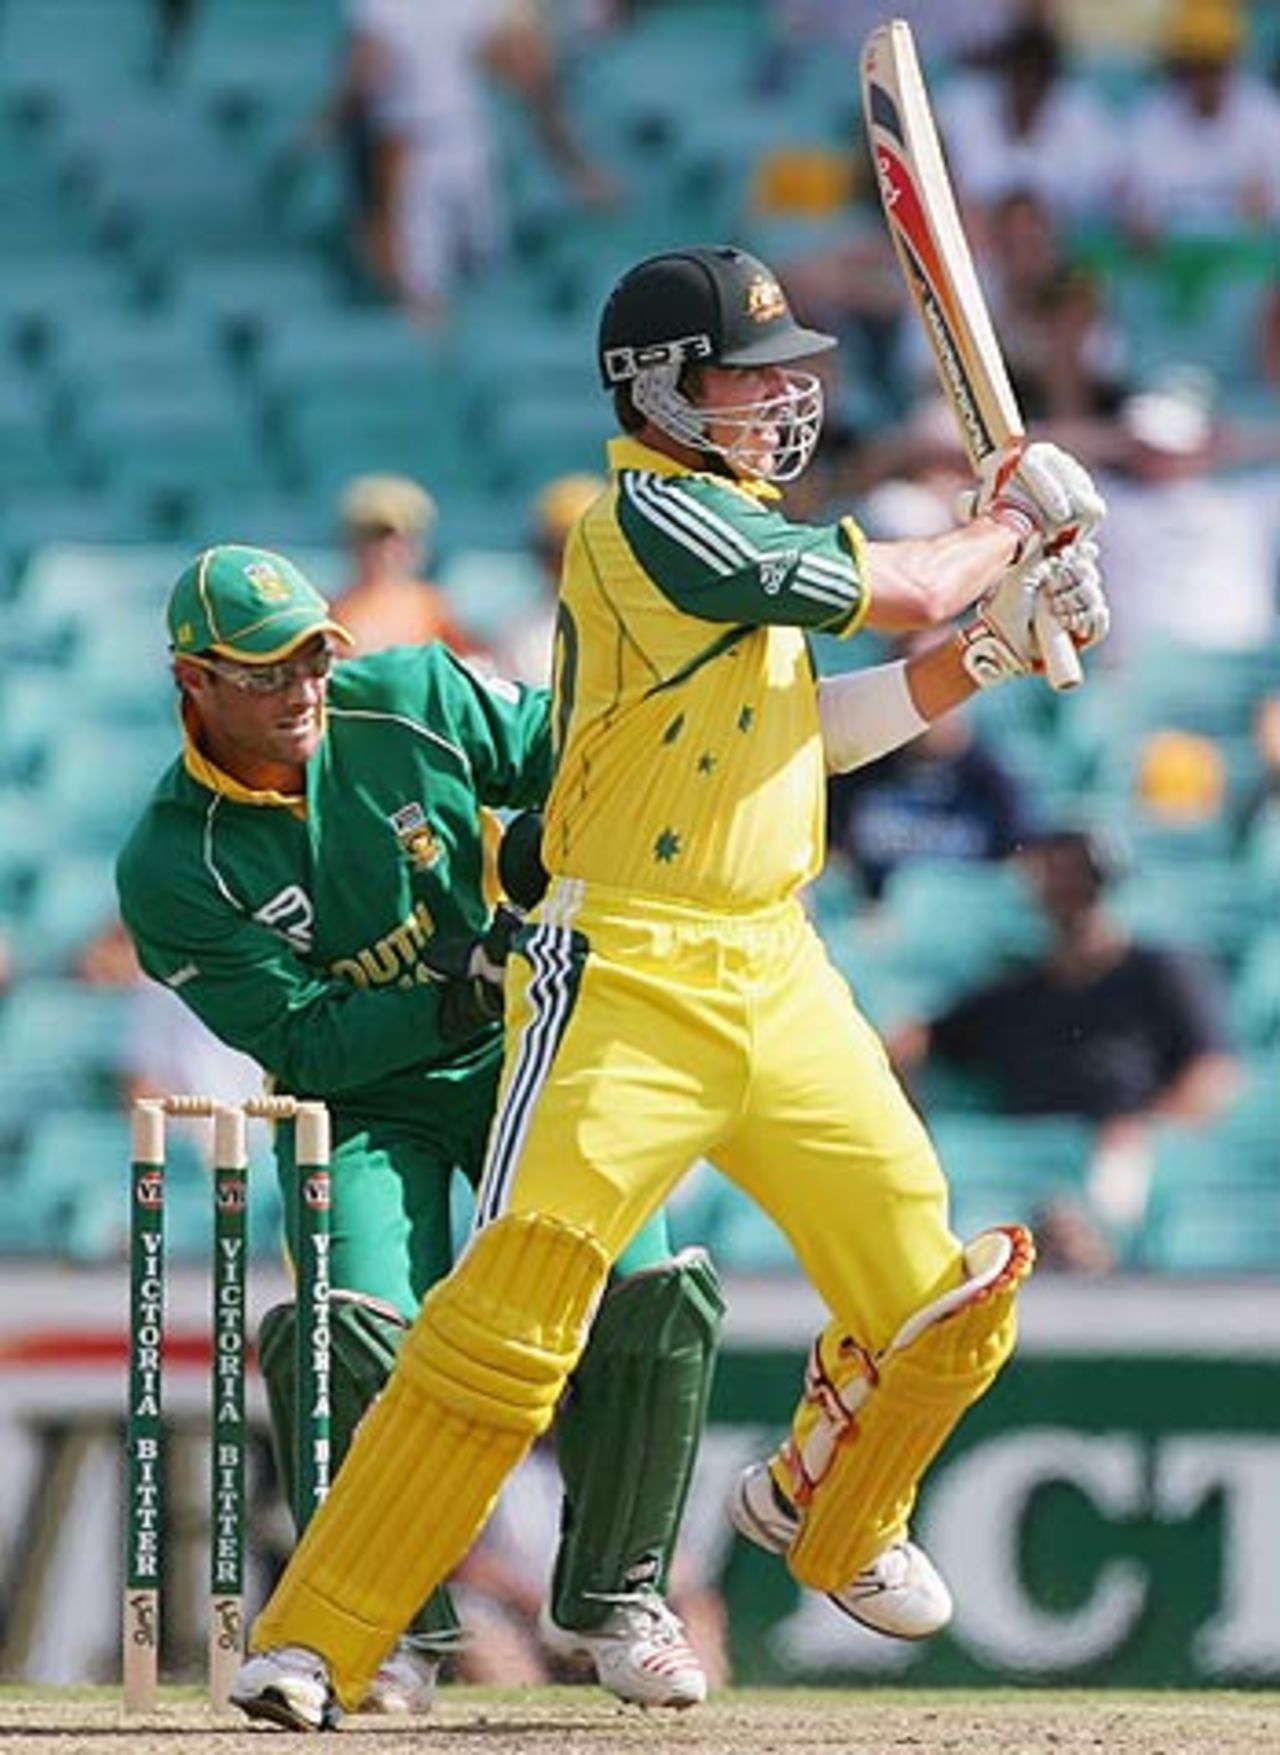 Damien Martyn hit 79 from 75 deliveries, Australia v South Africa, VB Series, Sydney, February 5, 2006